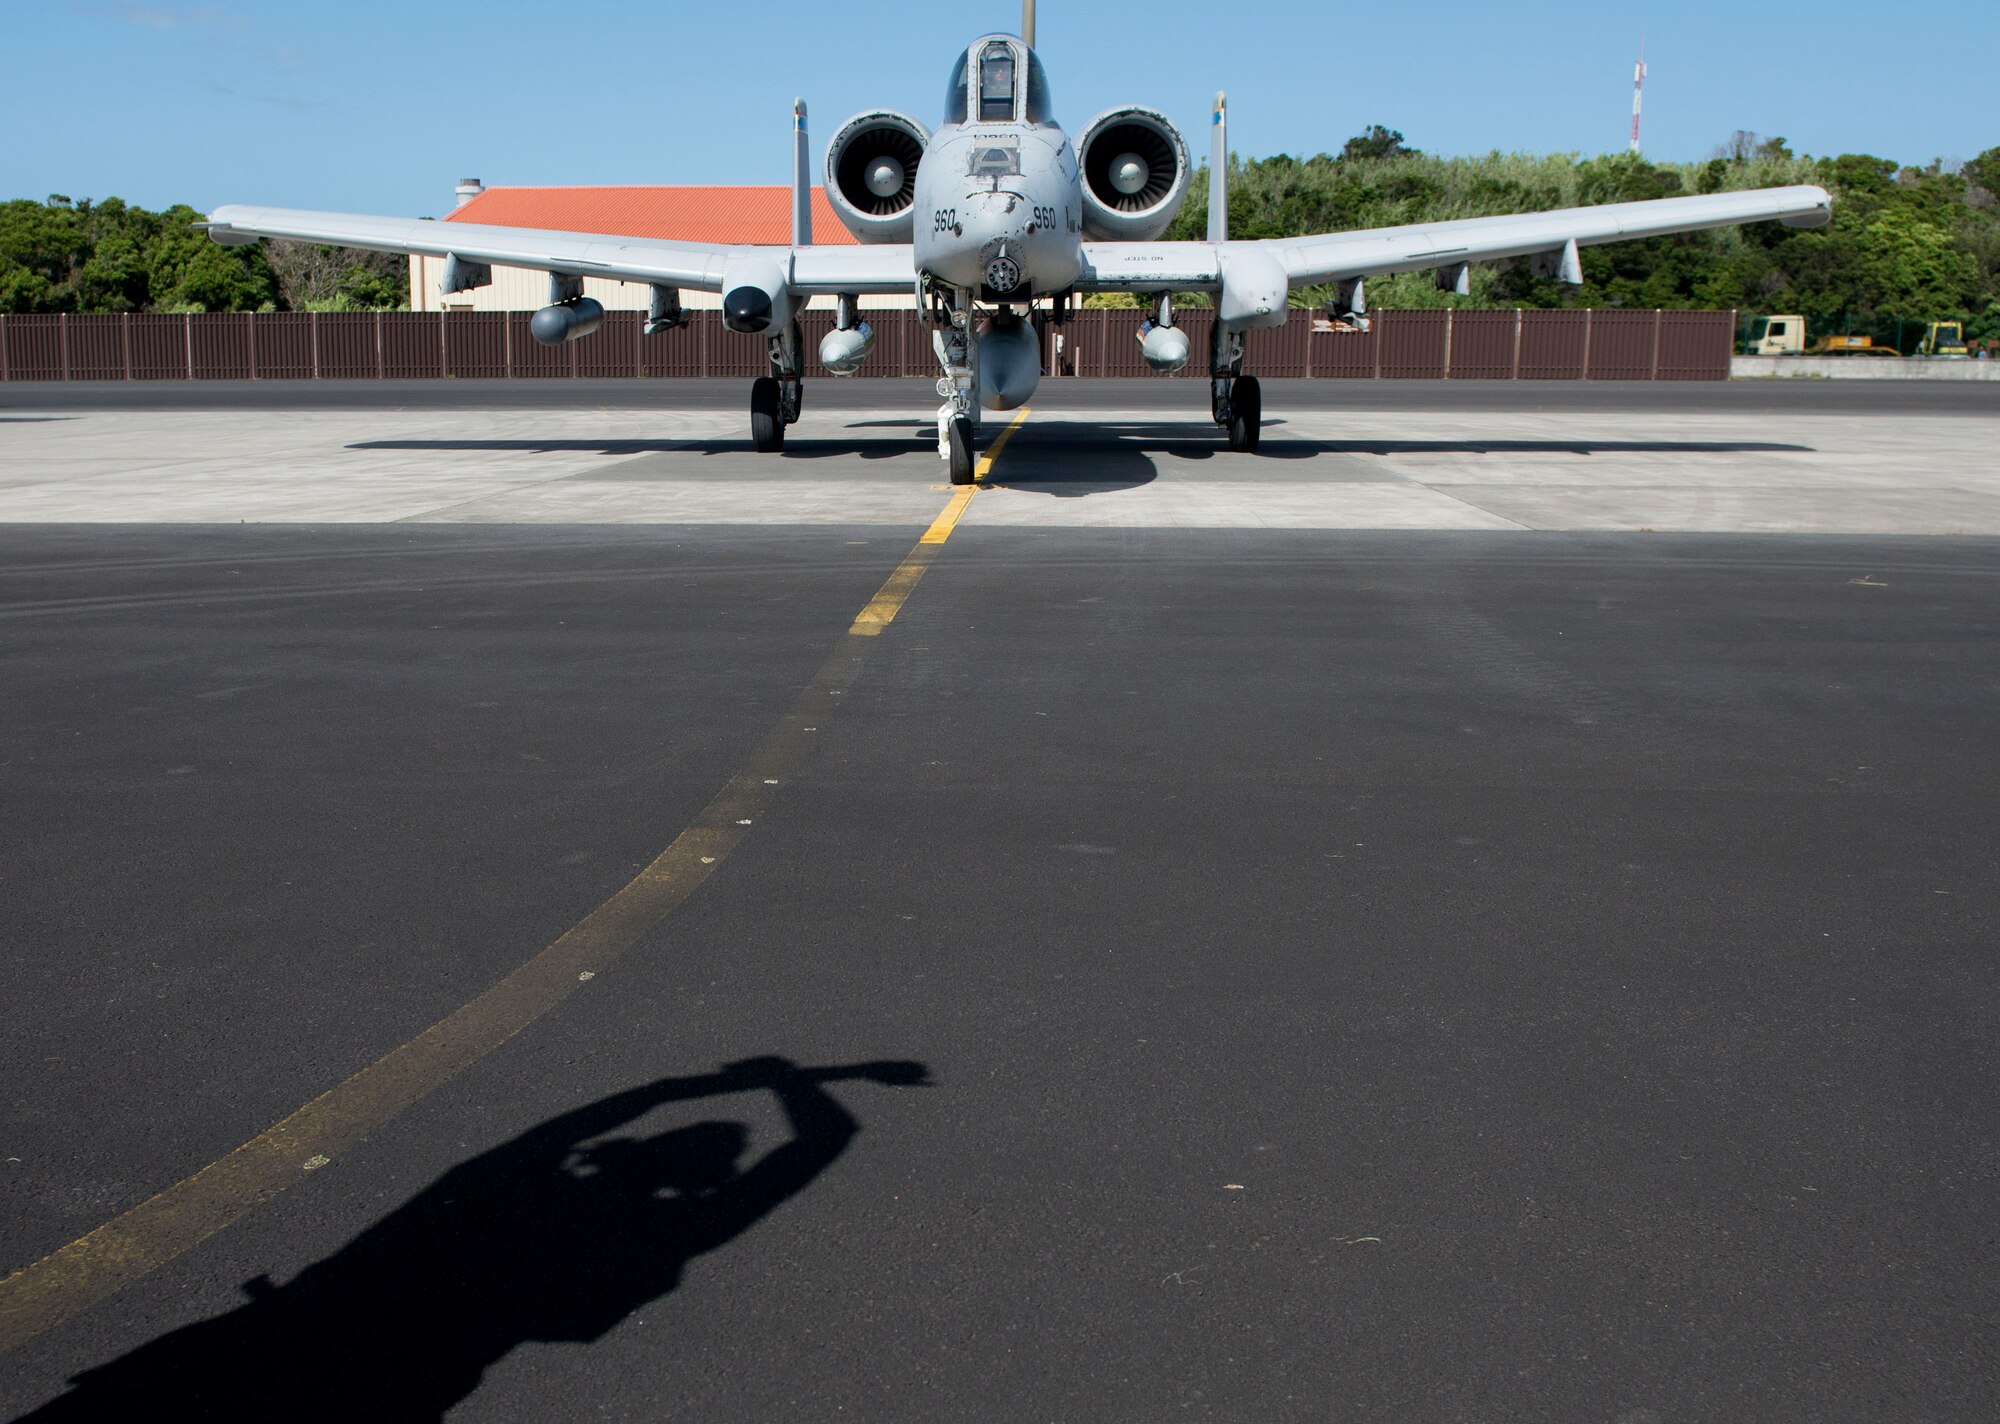 Captain Rachael Winiecki, a 354th Expeditionary Fighter Squadron A-10 Thunderbolt II pilot, is marshalled in by Senior Airman Samuel Clark, a 65th Operations Support Squadron transient alert maintenance technician, on Lajes Field, Azores, Portugal, August 1, 2015. The 354th Expeditionary Fighter Squadron returns home after deploying 12 A-10s as part of a Theater Security Package in support of Operation Atlantic Resolve, to Spangdahlem AB, Germany where they conducted training alongside our NATO allies to strengthen interoperability and to demonstrate U.S. commitment to the security and stability of Europe. (U.S. Air Force photo by Master Sgt. Bradley C. Church).